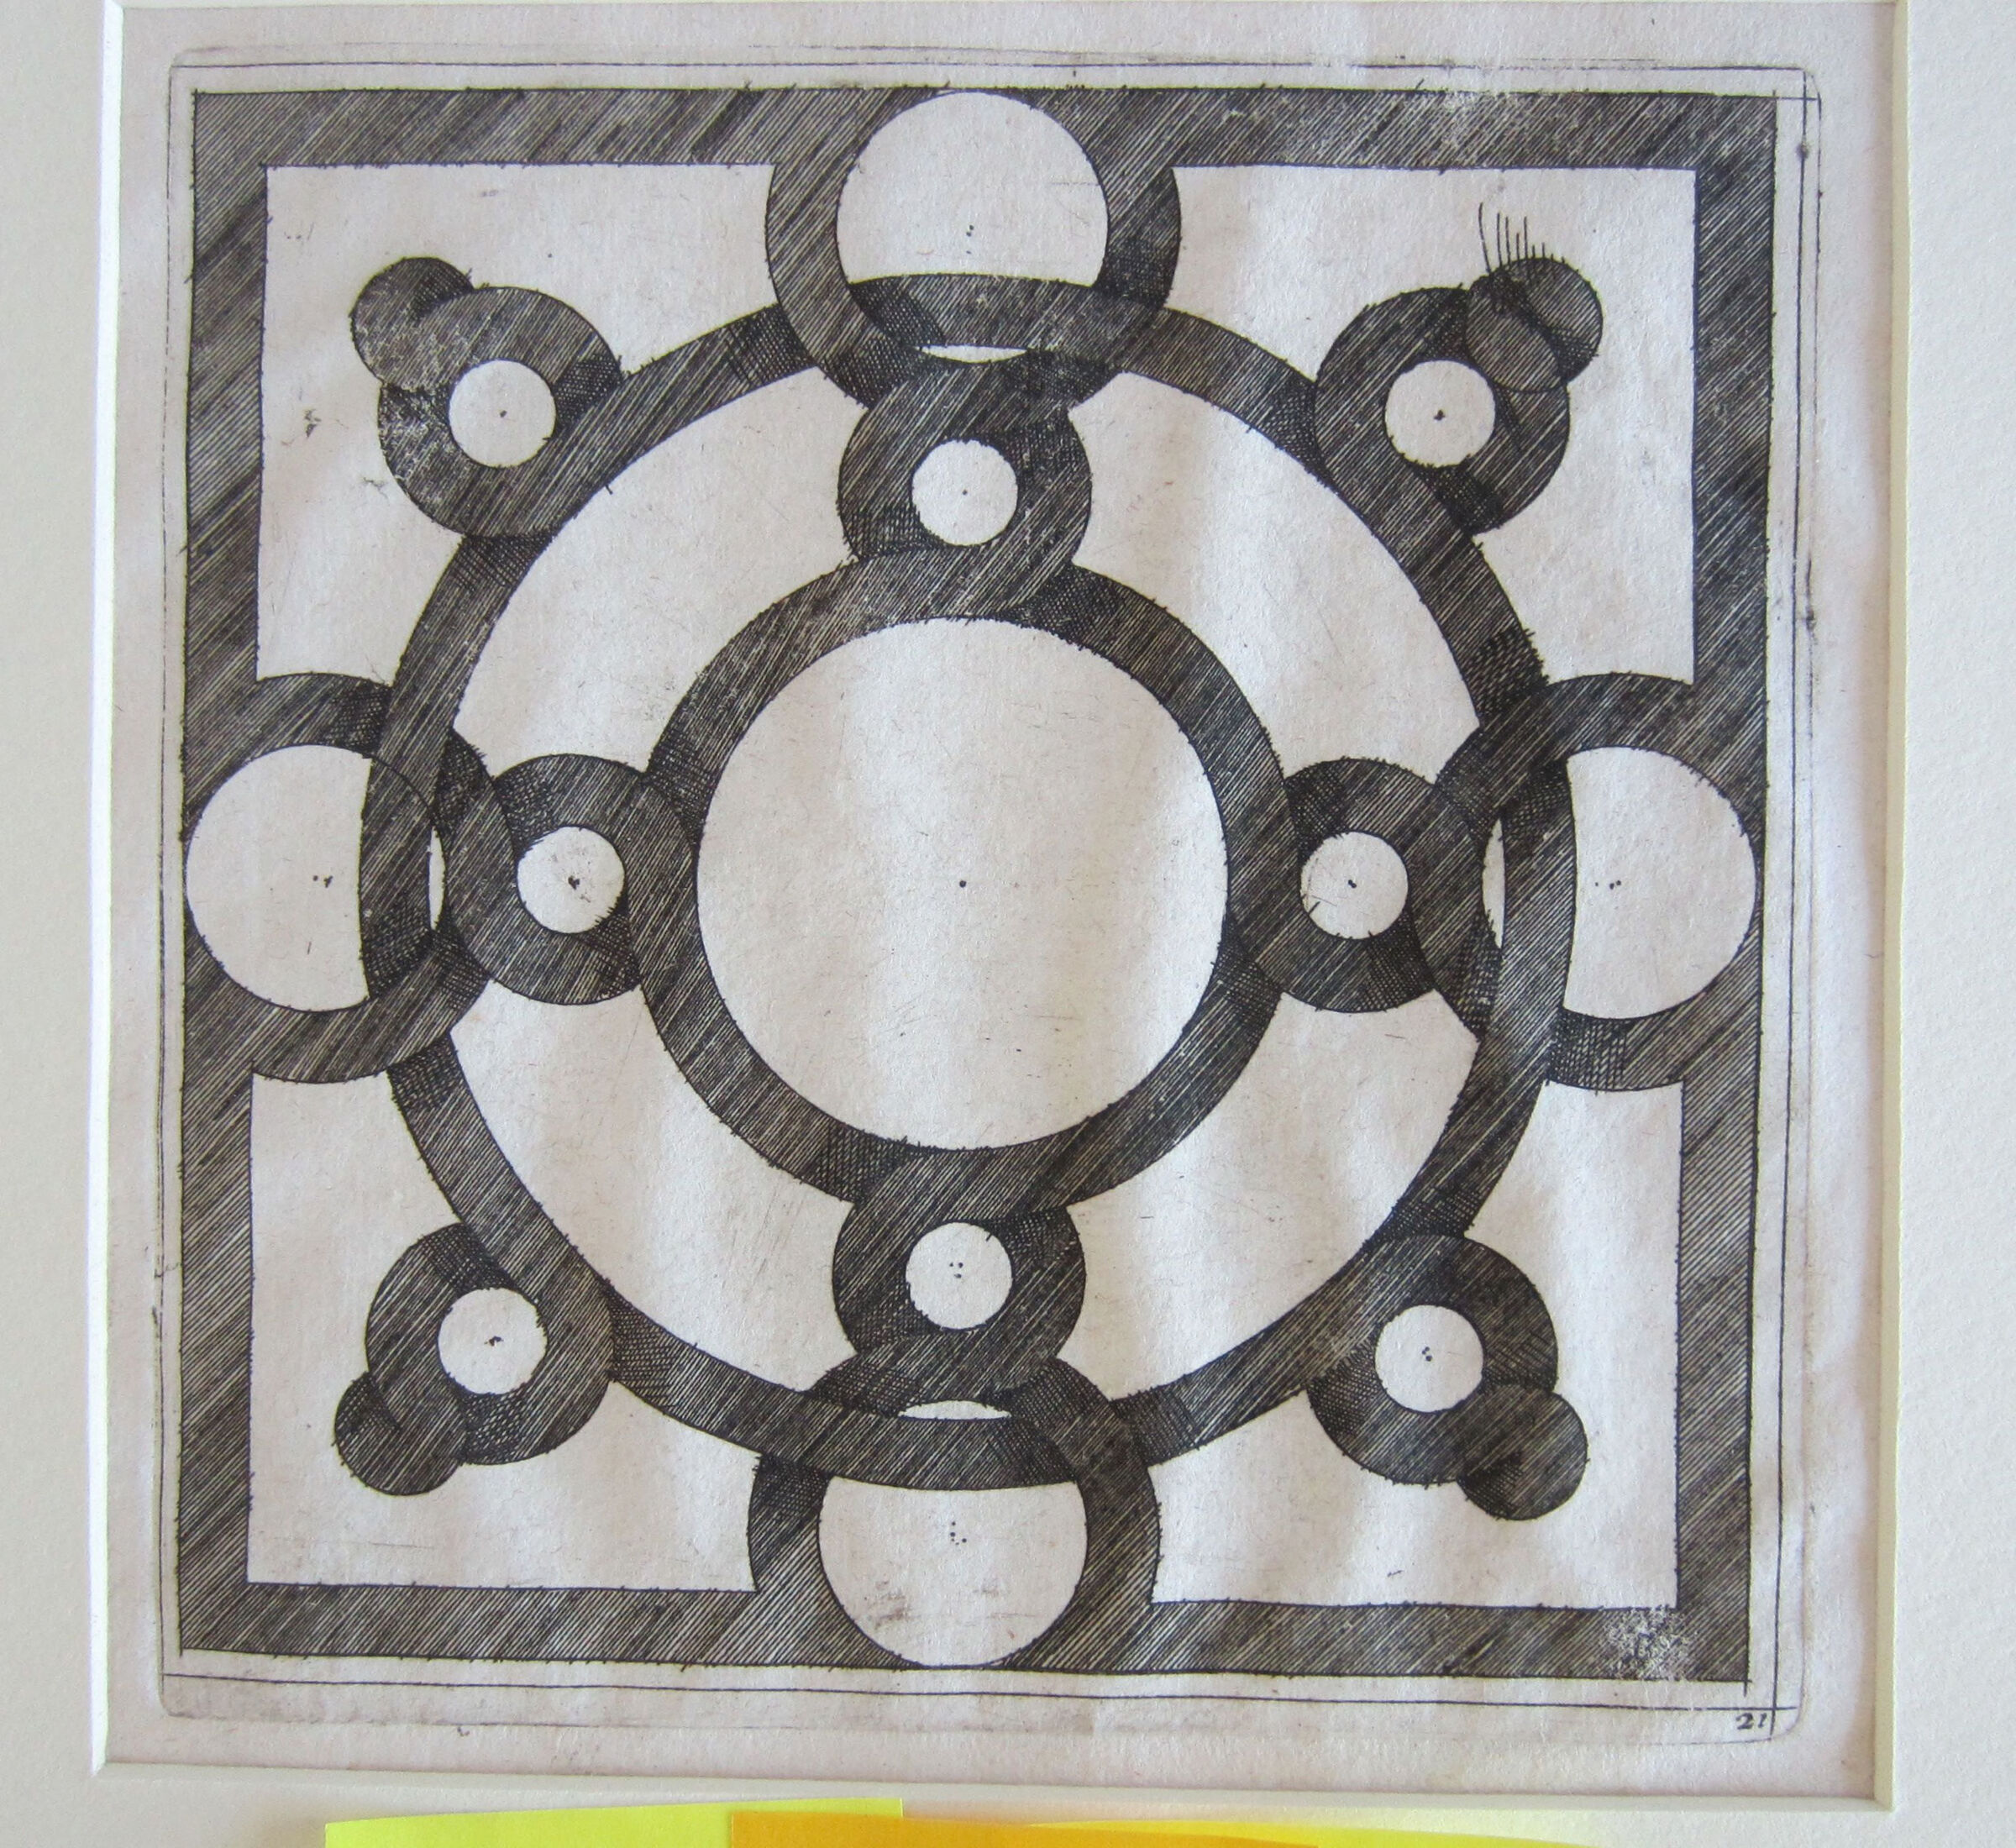 Interlace With Two Concentric Circles, Their Ornament Forming Twelve Smaller Circles